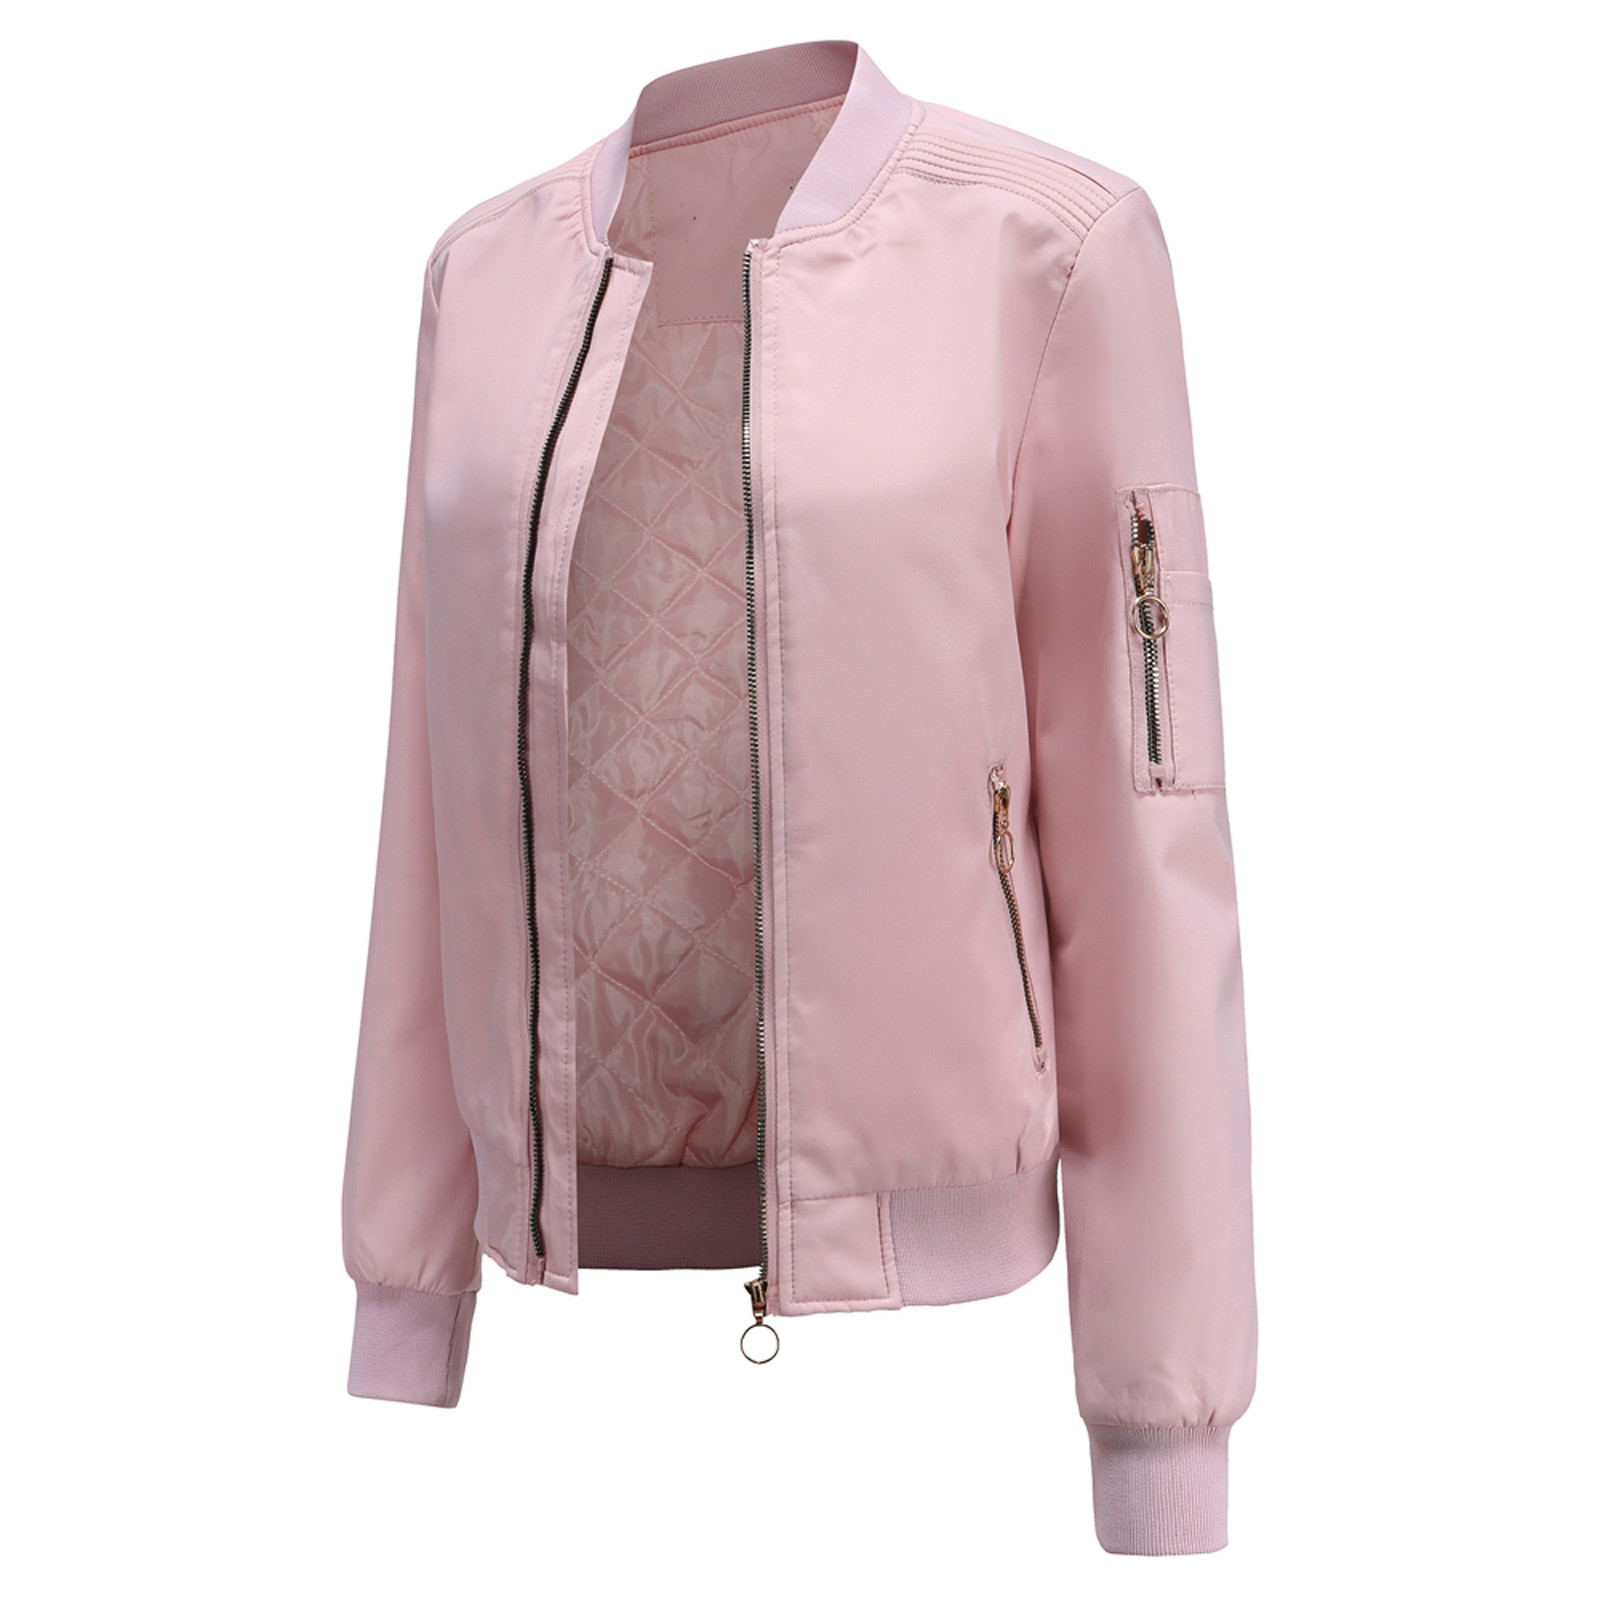 Women Bomber Motorcycle Jacket Long Sleeve Stand Collar Slim Fit Outerwear Coat Note Please Buy One Or Two Sizes Larger - image 4 of 6